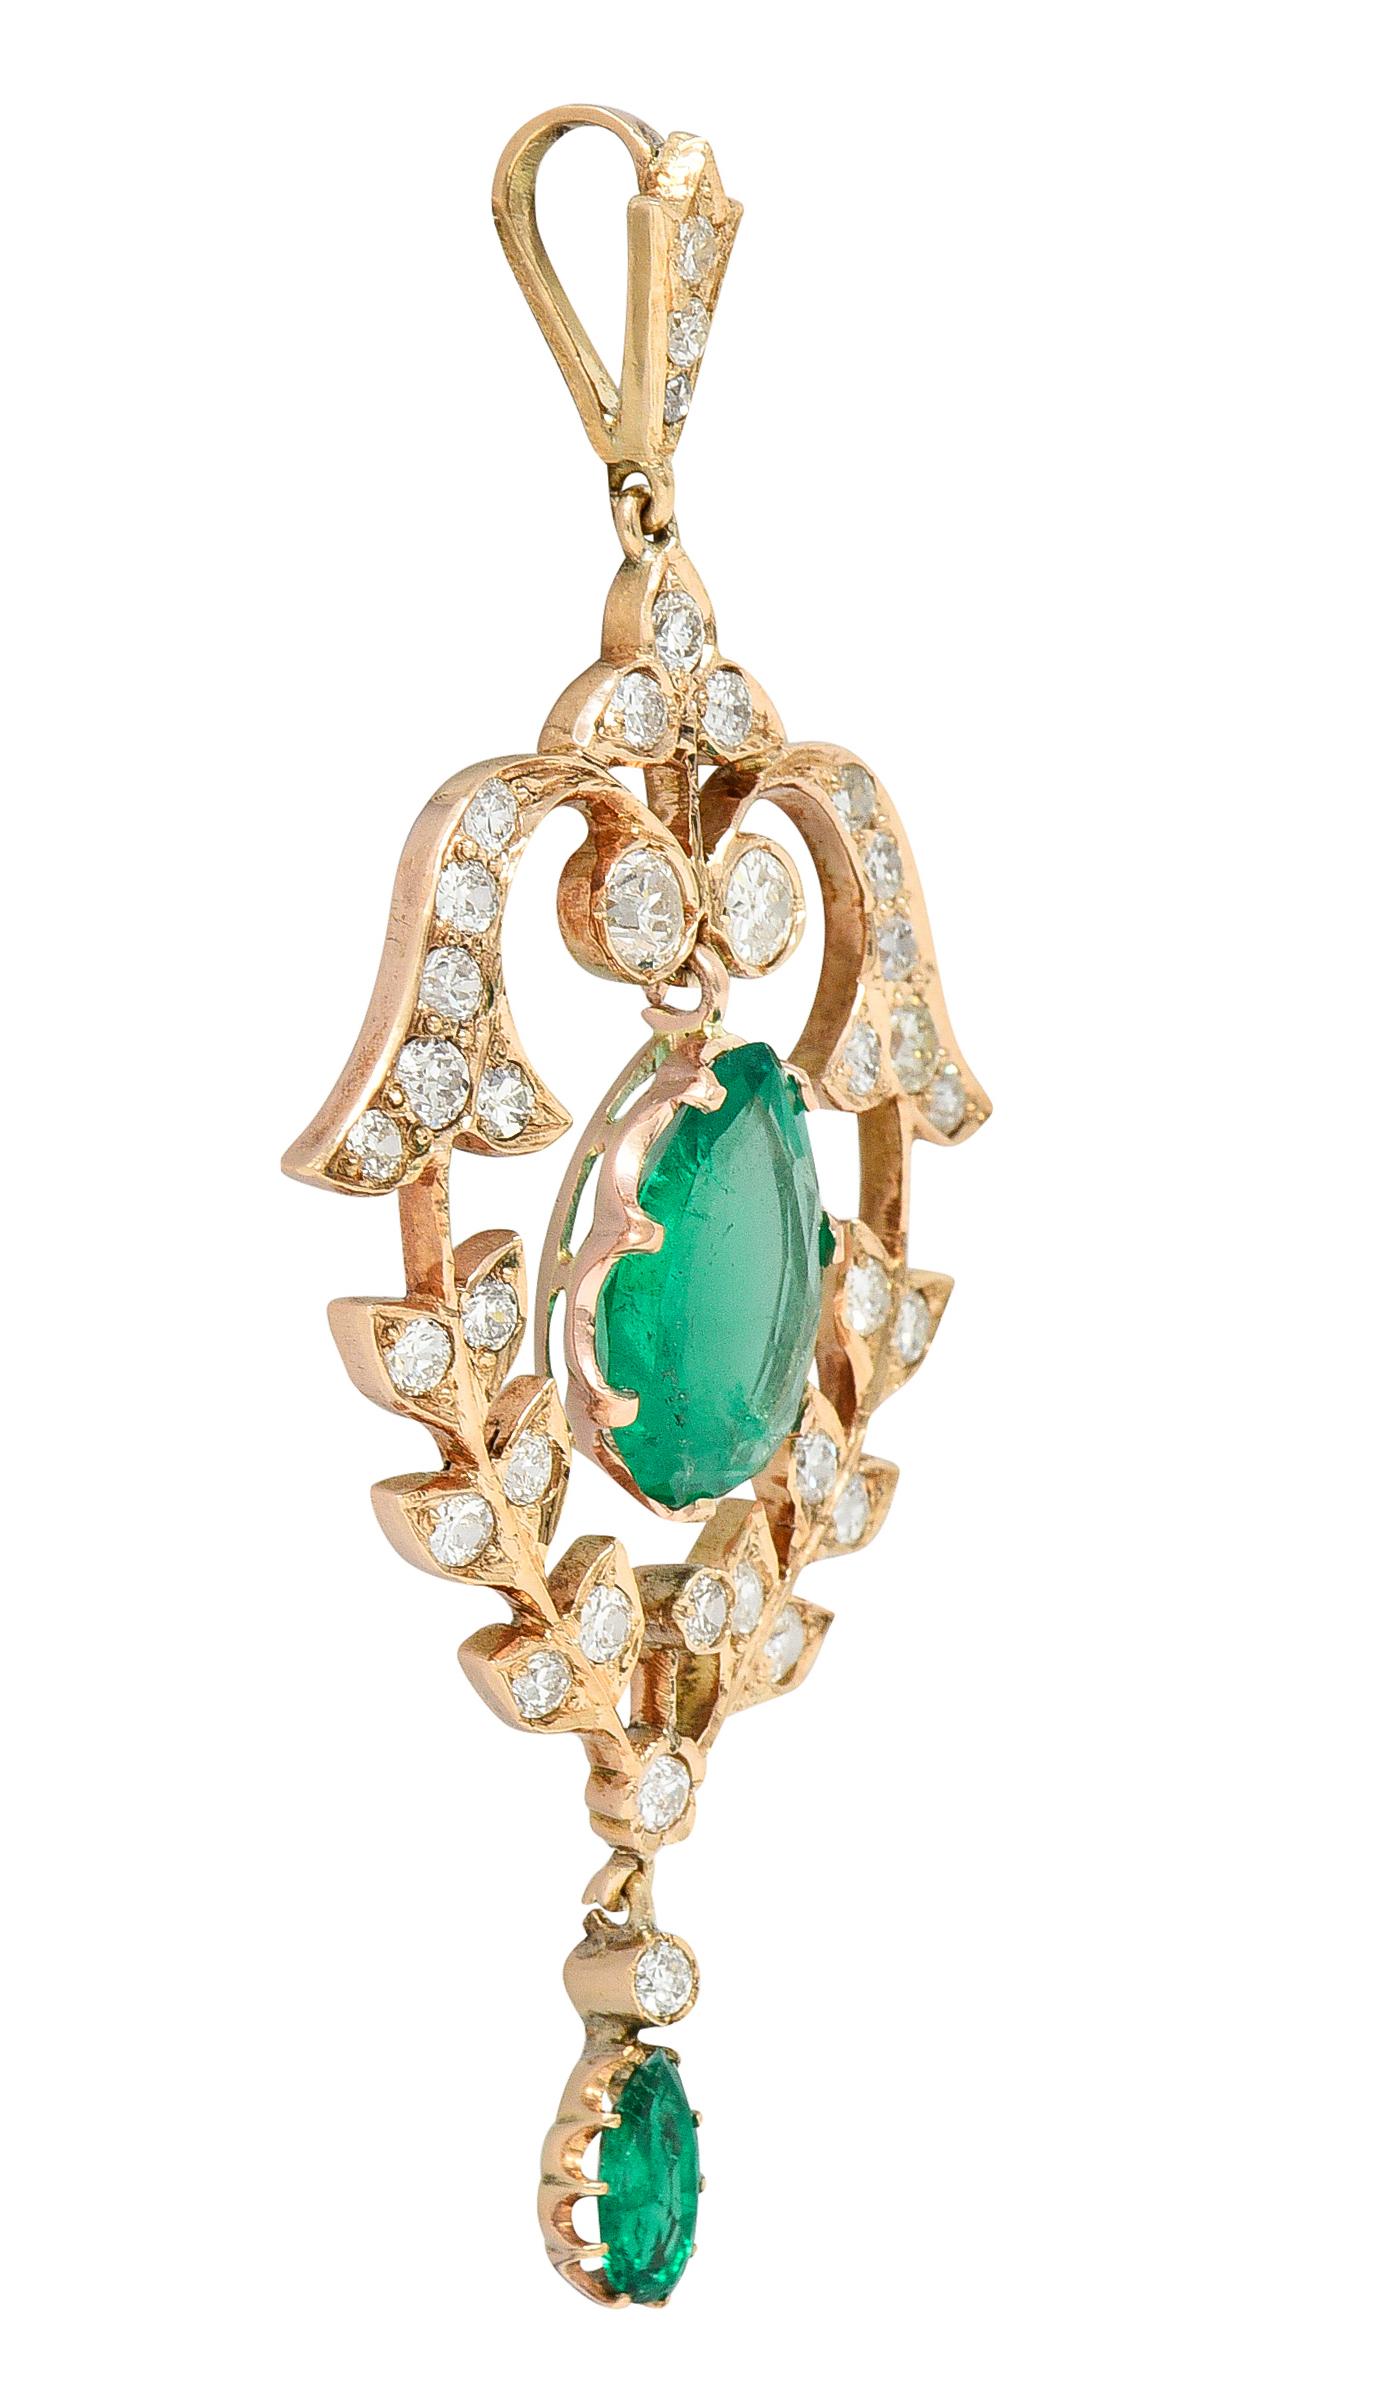 Designed as a lavalier style foliate motif pendant centering an articulating pear cut emerald drop. Natural Colombian in origin with minor traditional clarity enhancement. Prong set and weighing 2.83 carats total - transparent bright green in color.